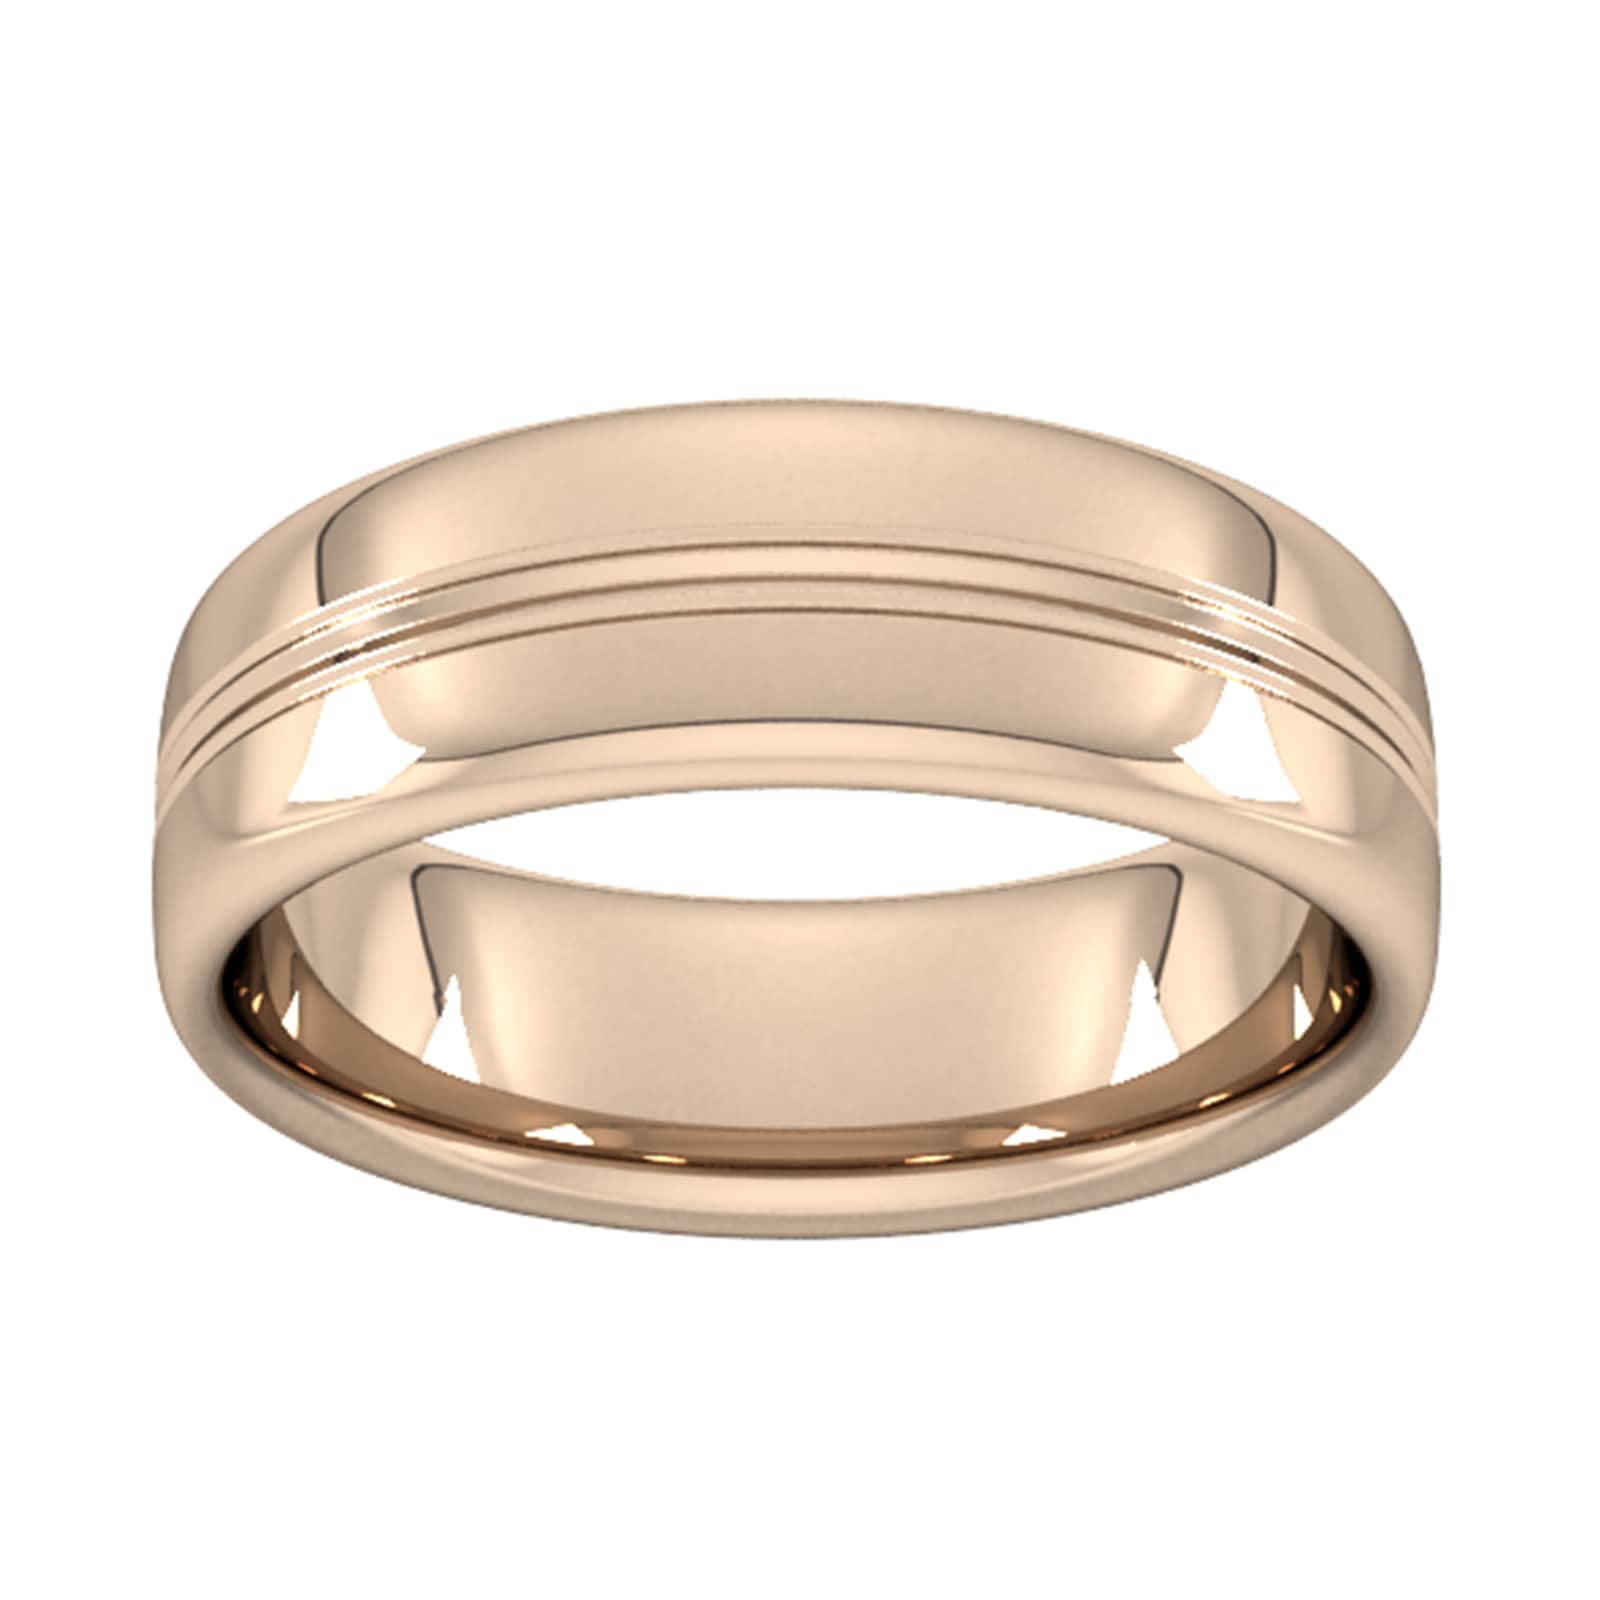 7mm Slight Court Heavy Grooved Polished Finish Wedding Ring In 9 Carat Rose Gold - Ring Size P